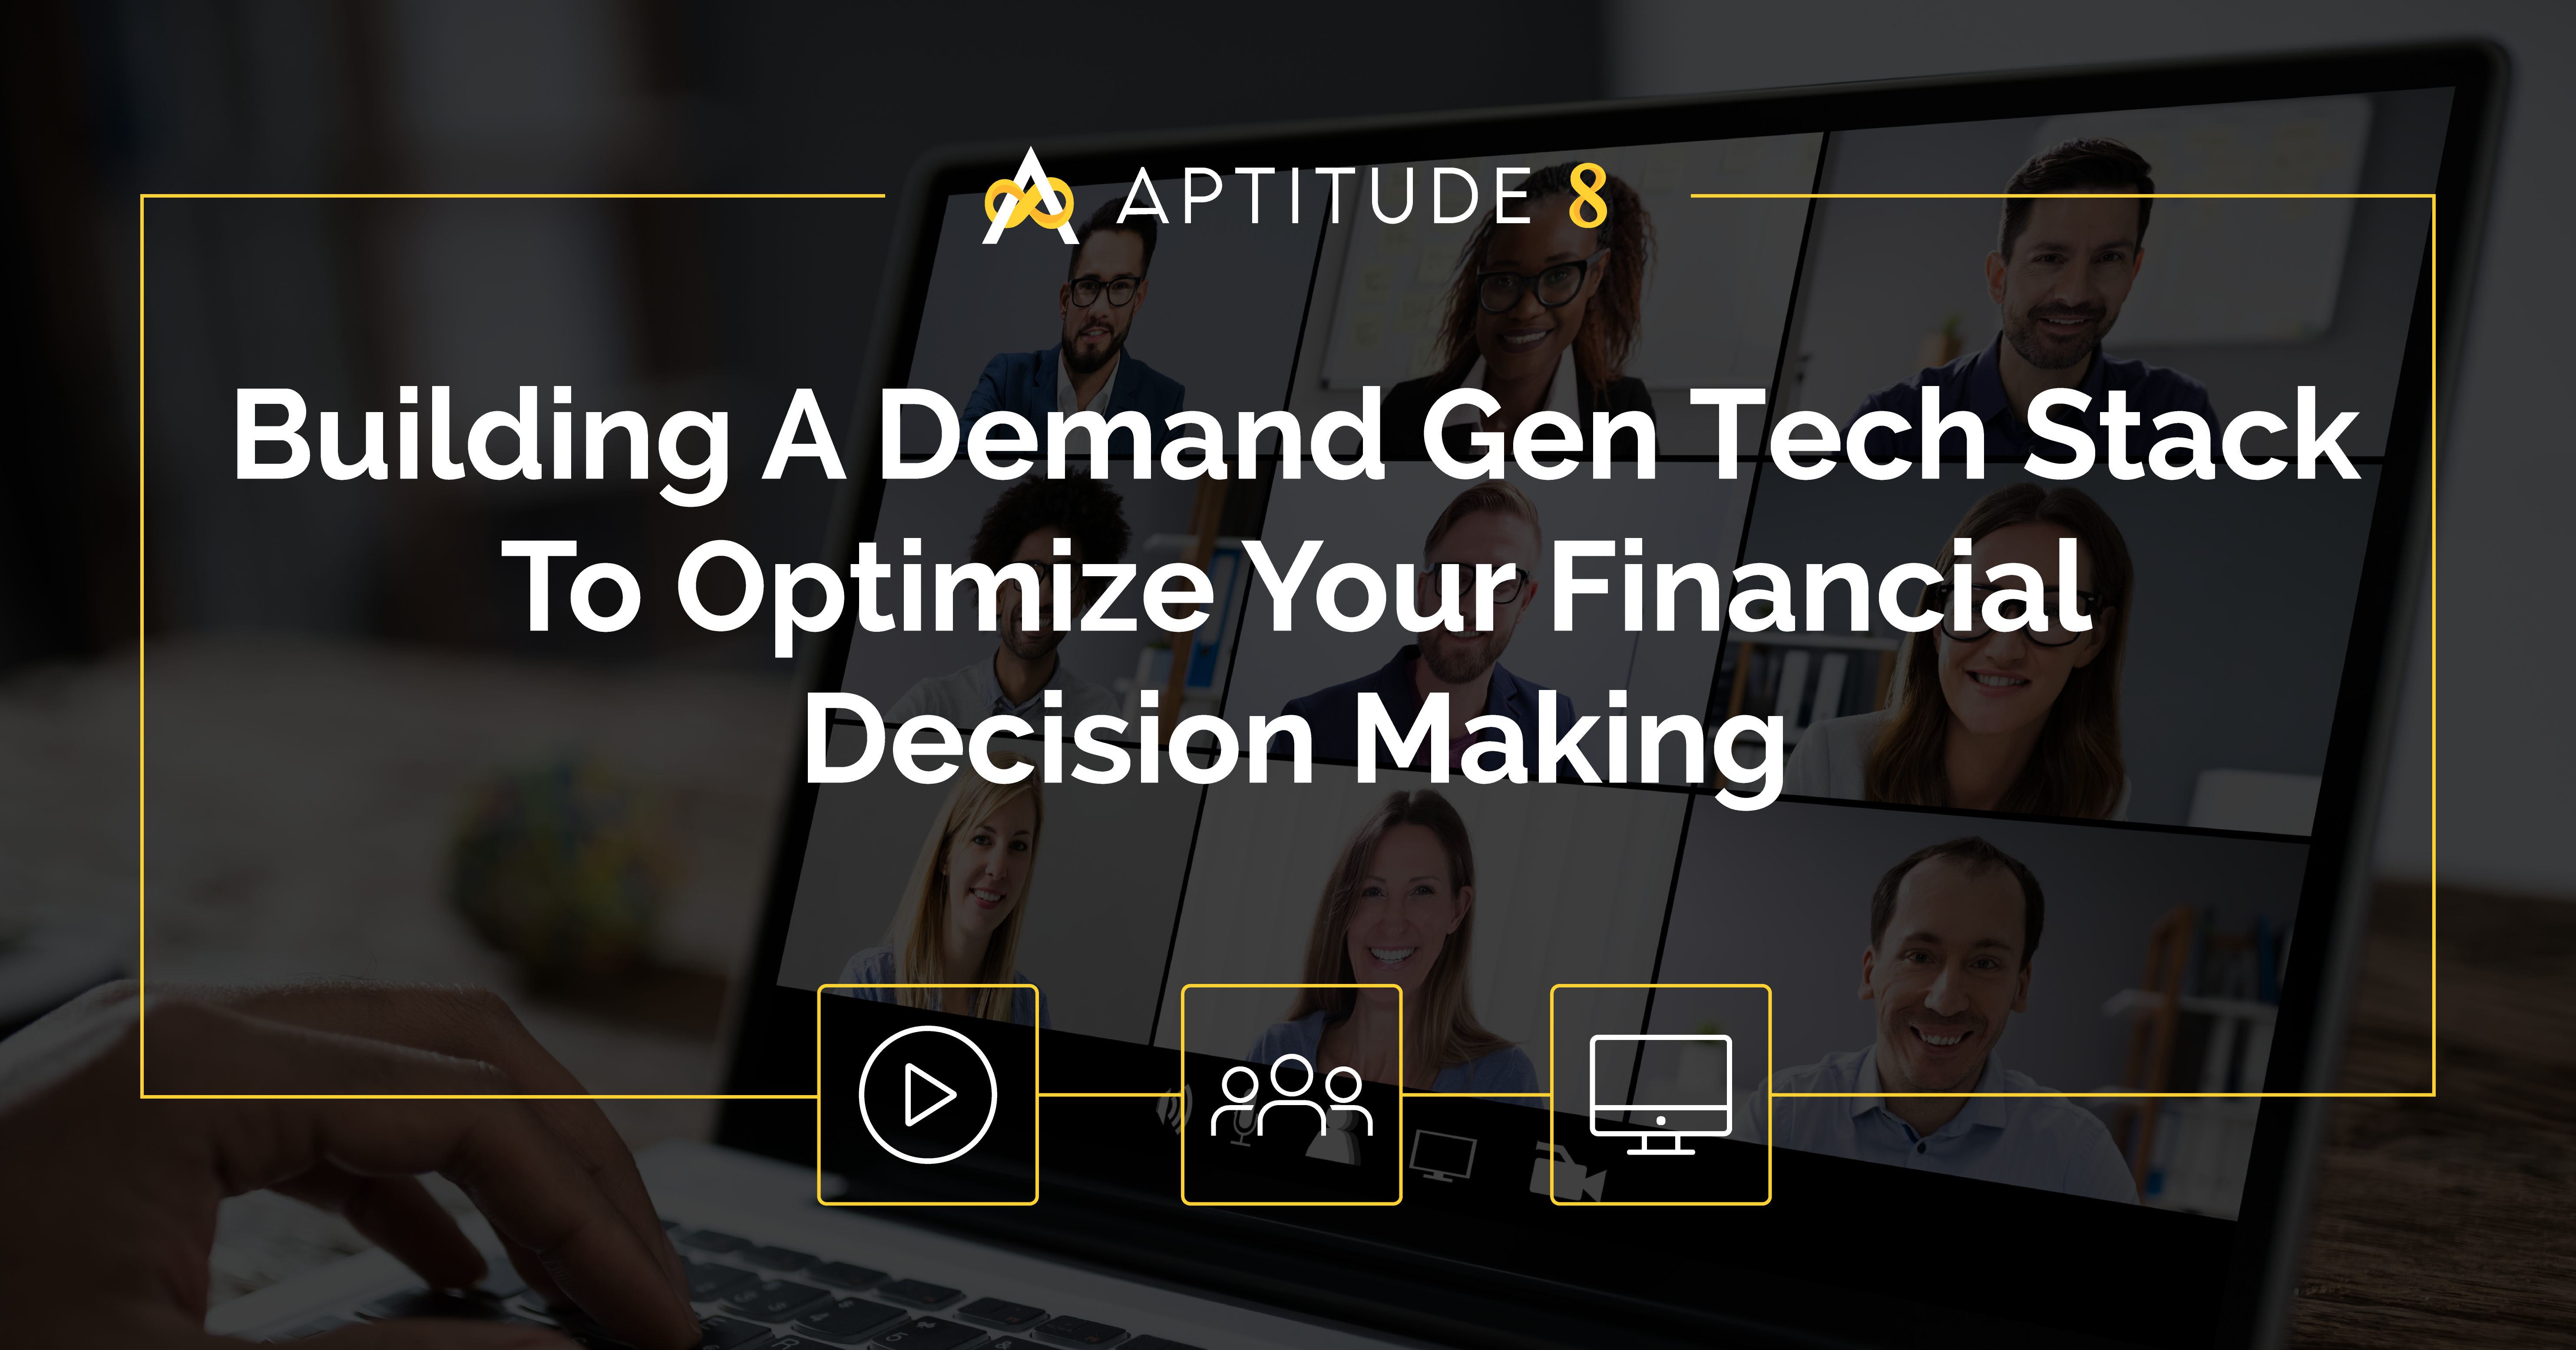 Building A Demand Gen Stack To Optimize Your Financial Decision Making